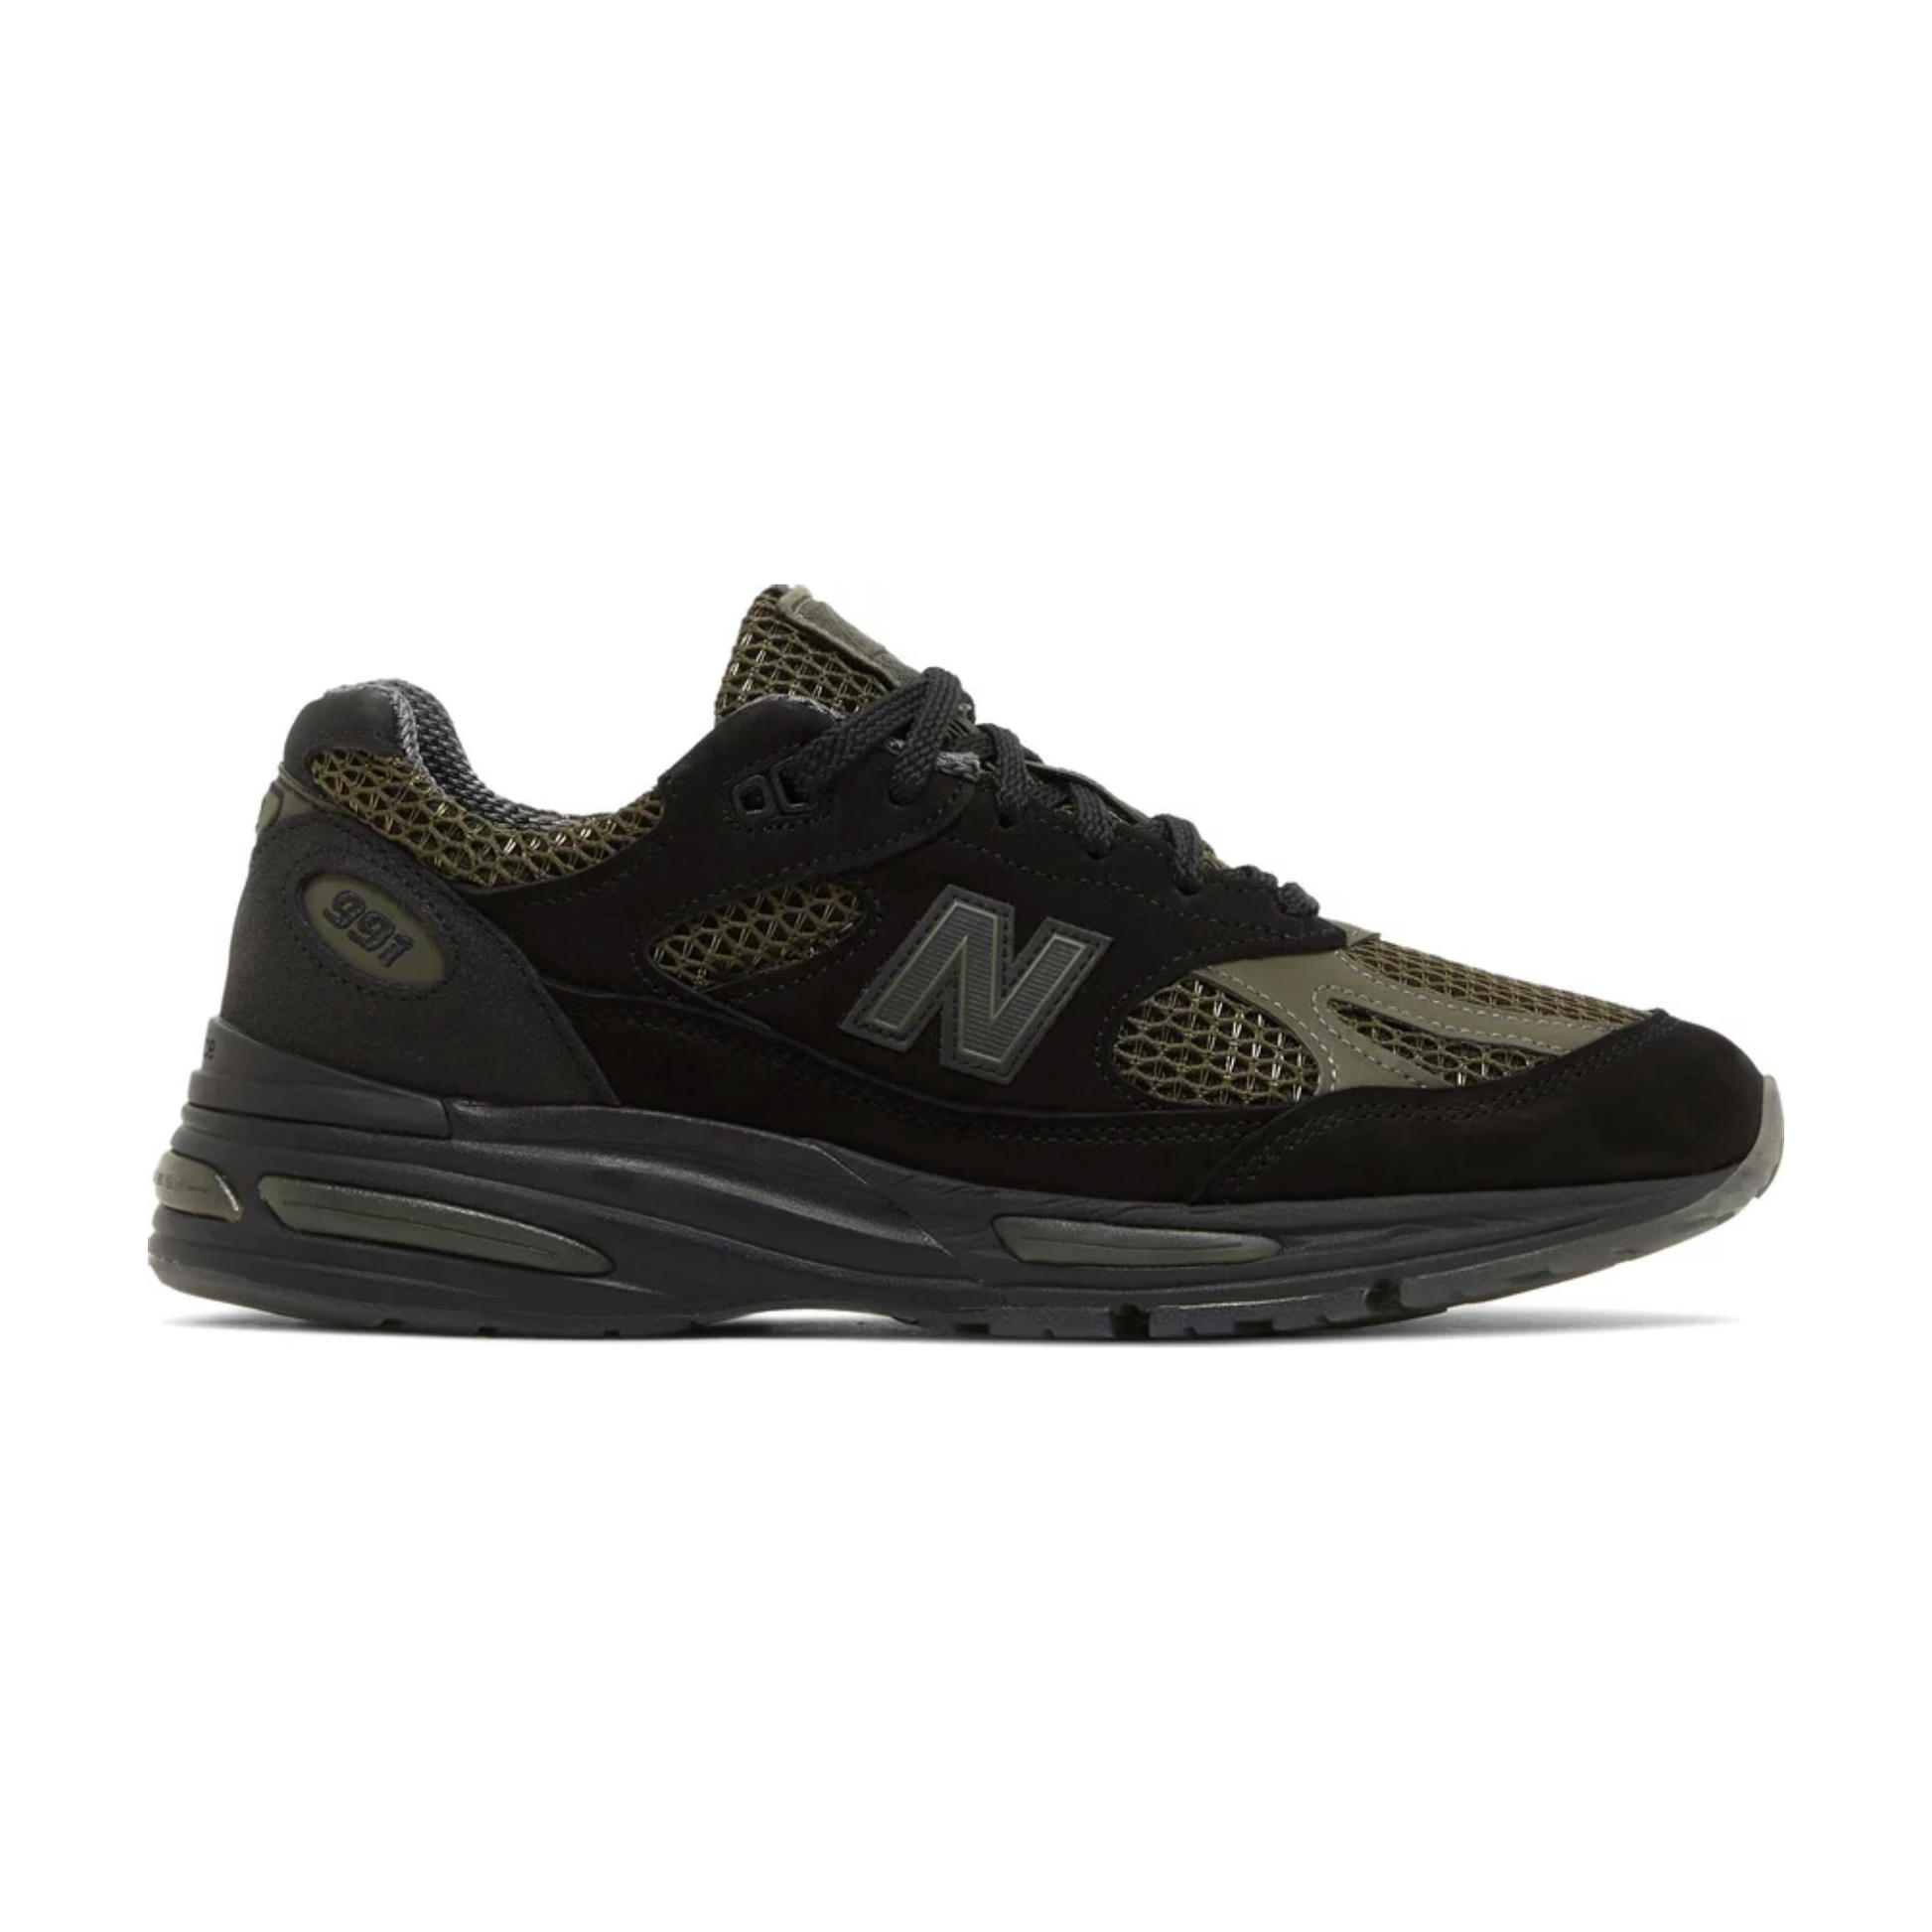 New Balance 991v2 Made in England x Stone Island 'Black' by New Balance from £415.00